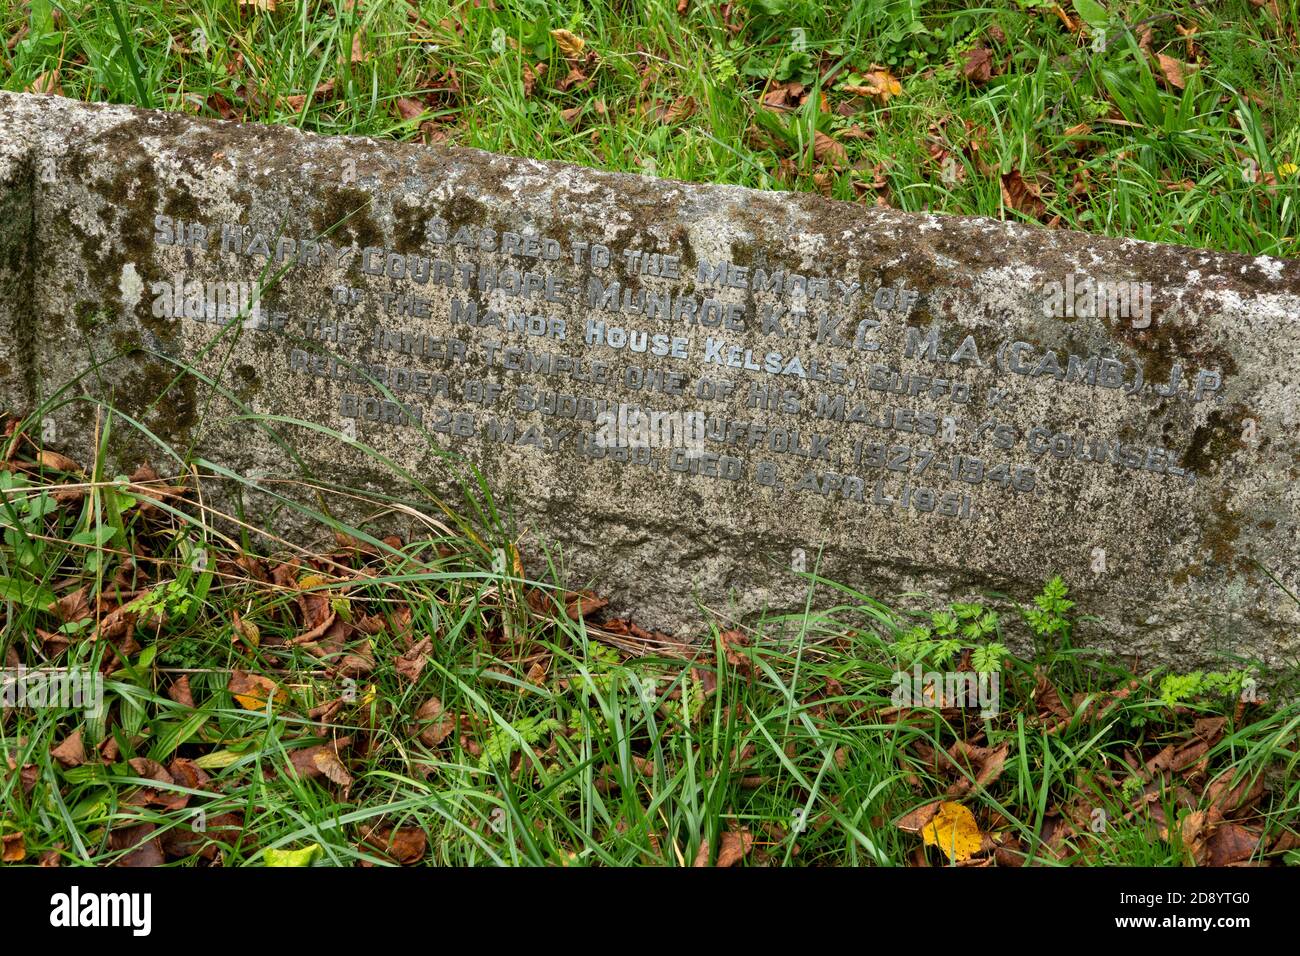 The grave headstone of Sir Harry Courthope Munroe, St Mary and St Peter's Kelsale, Suffolk, UK Stock Photo